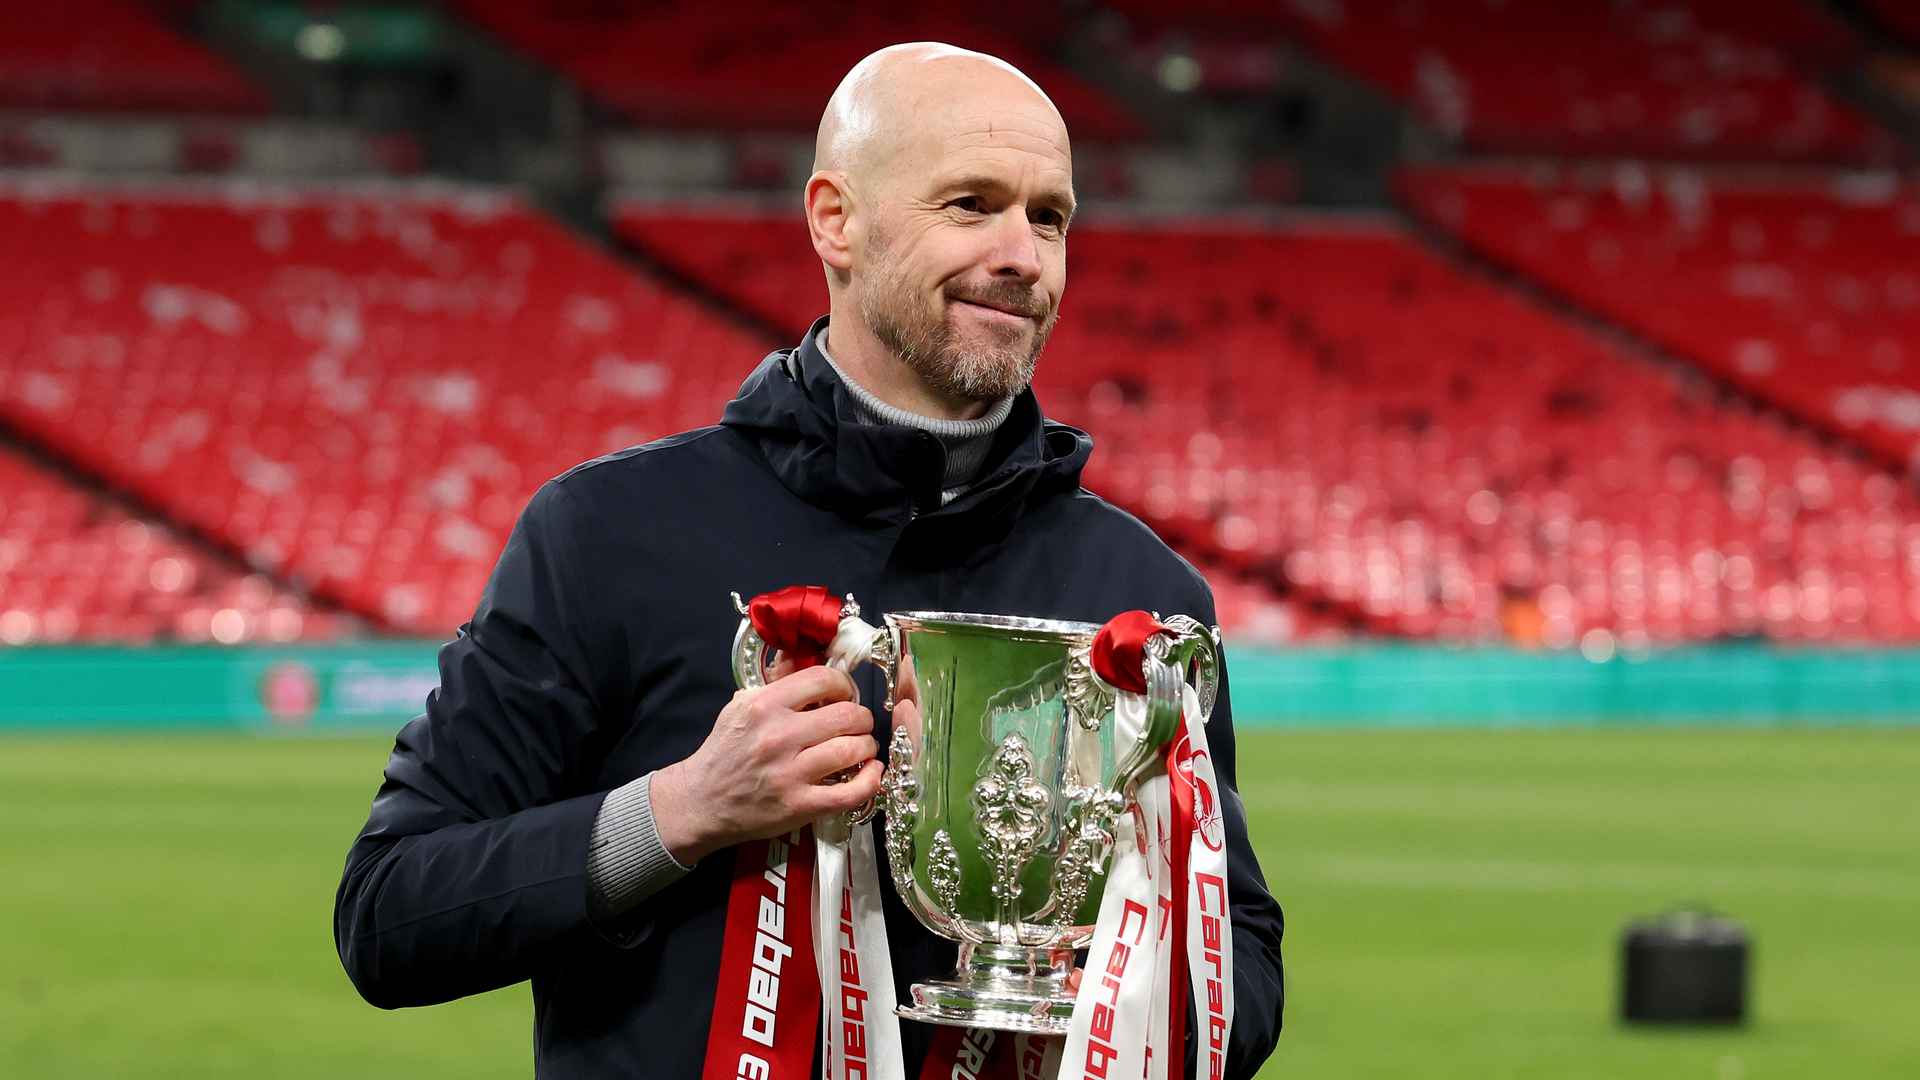 Manchester United vs. Liverpool: Ten Hag's redemption story?